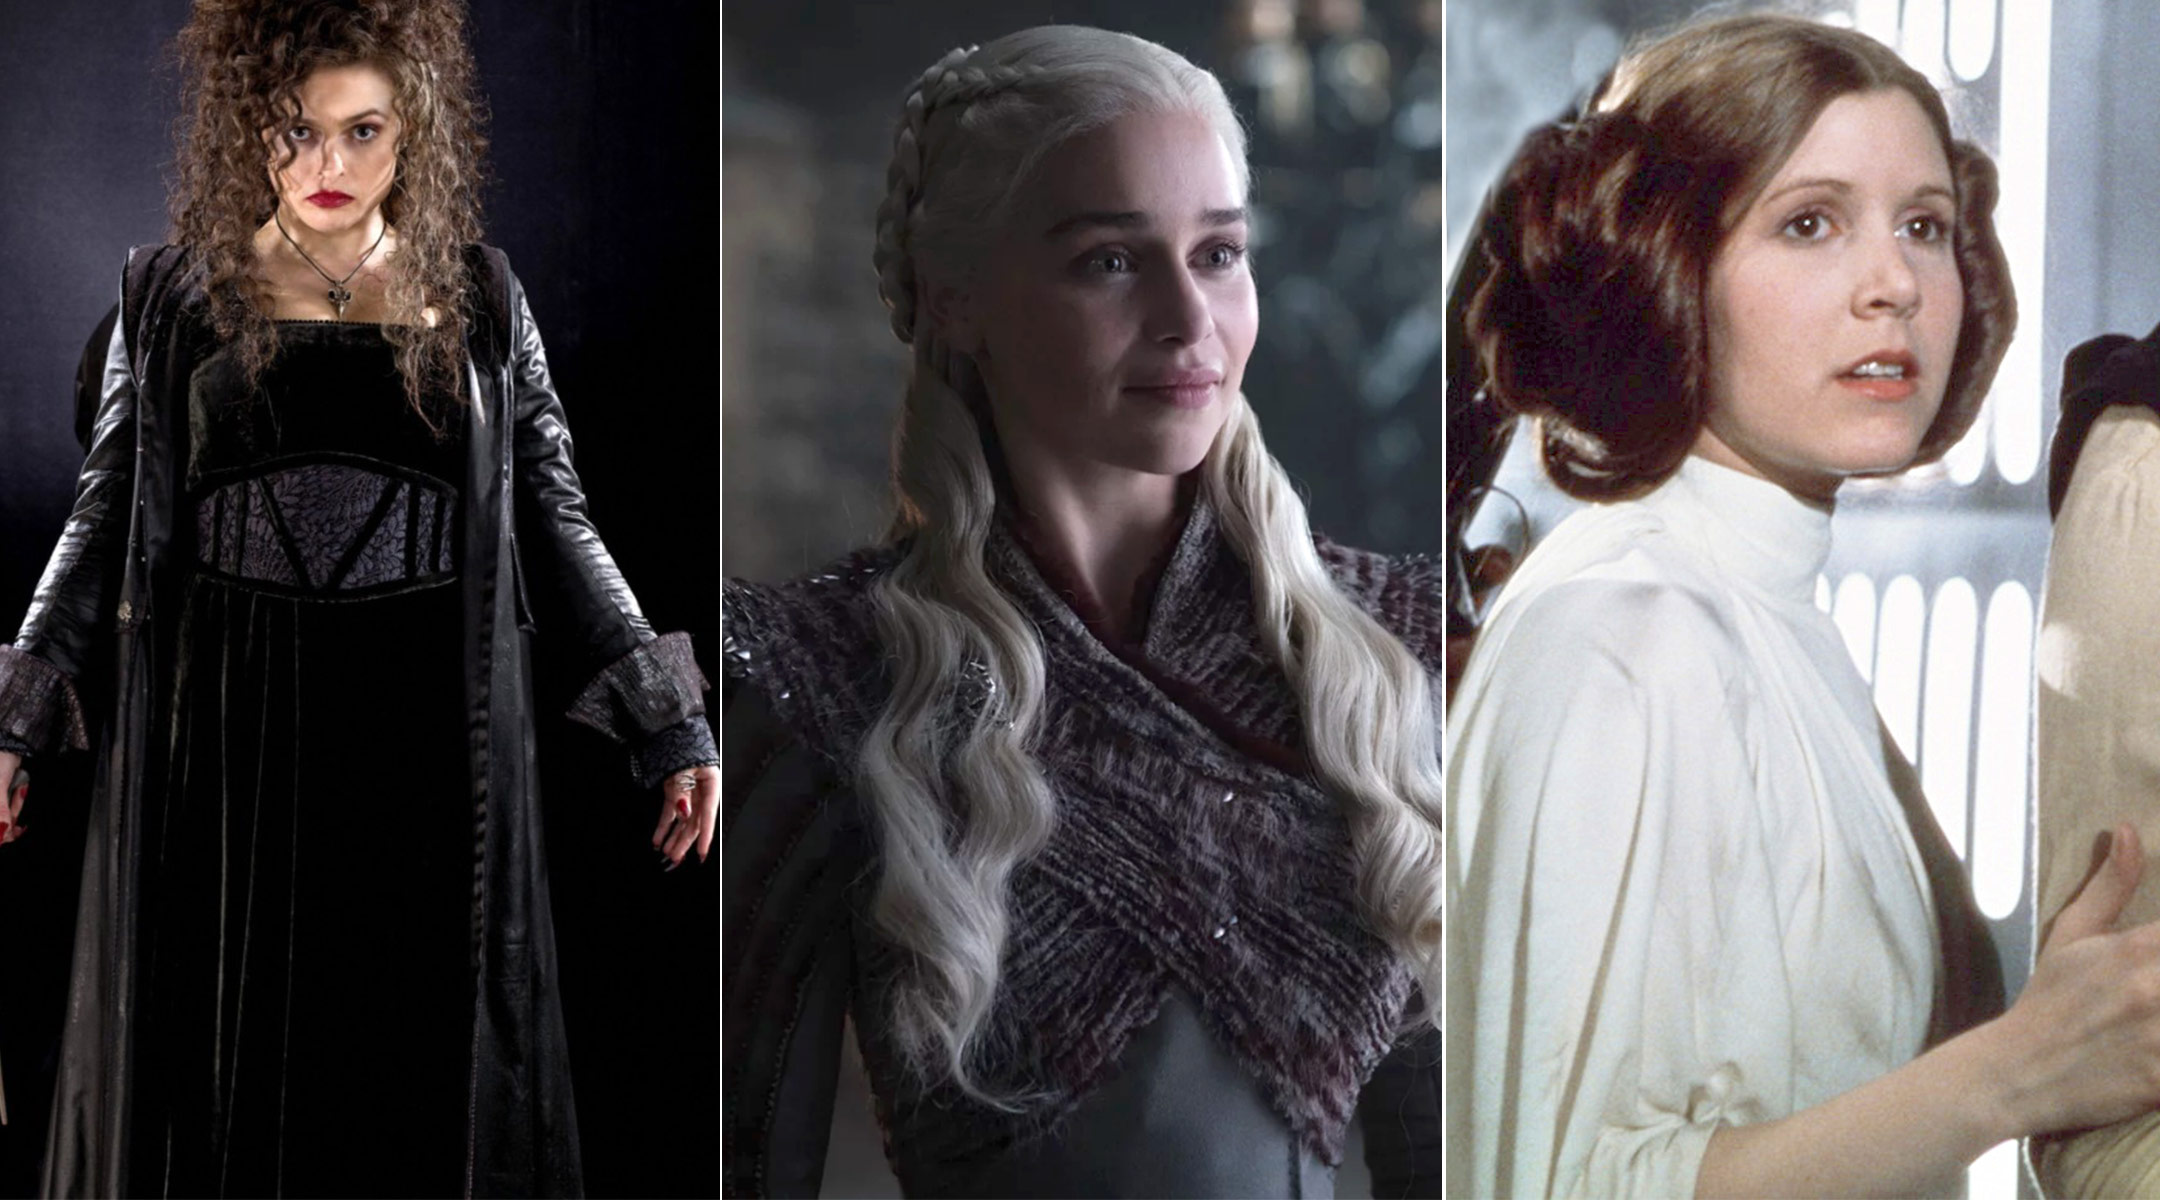 couple names baby after their favorite characters, bellatrix daenerys leia